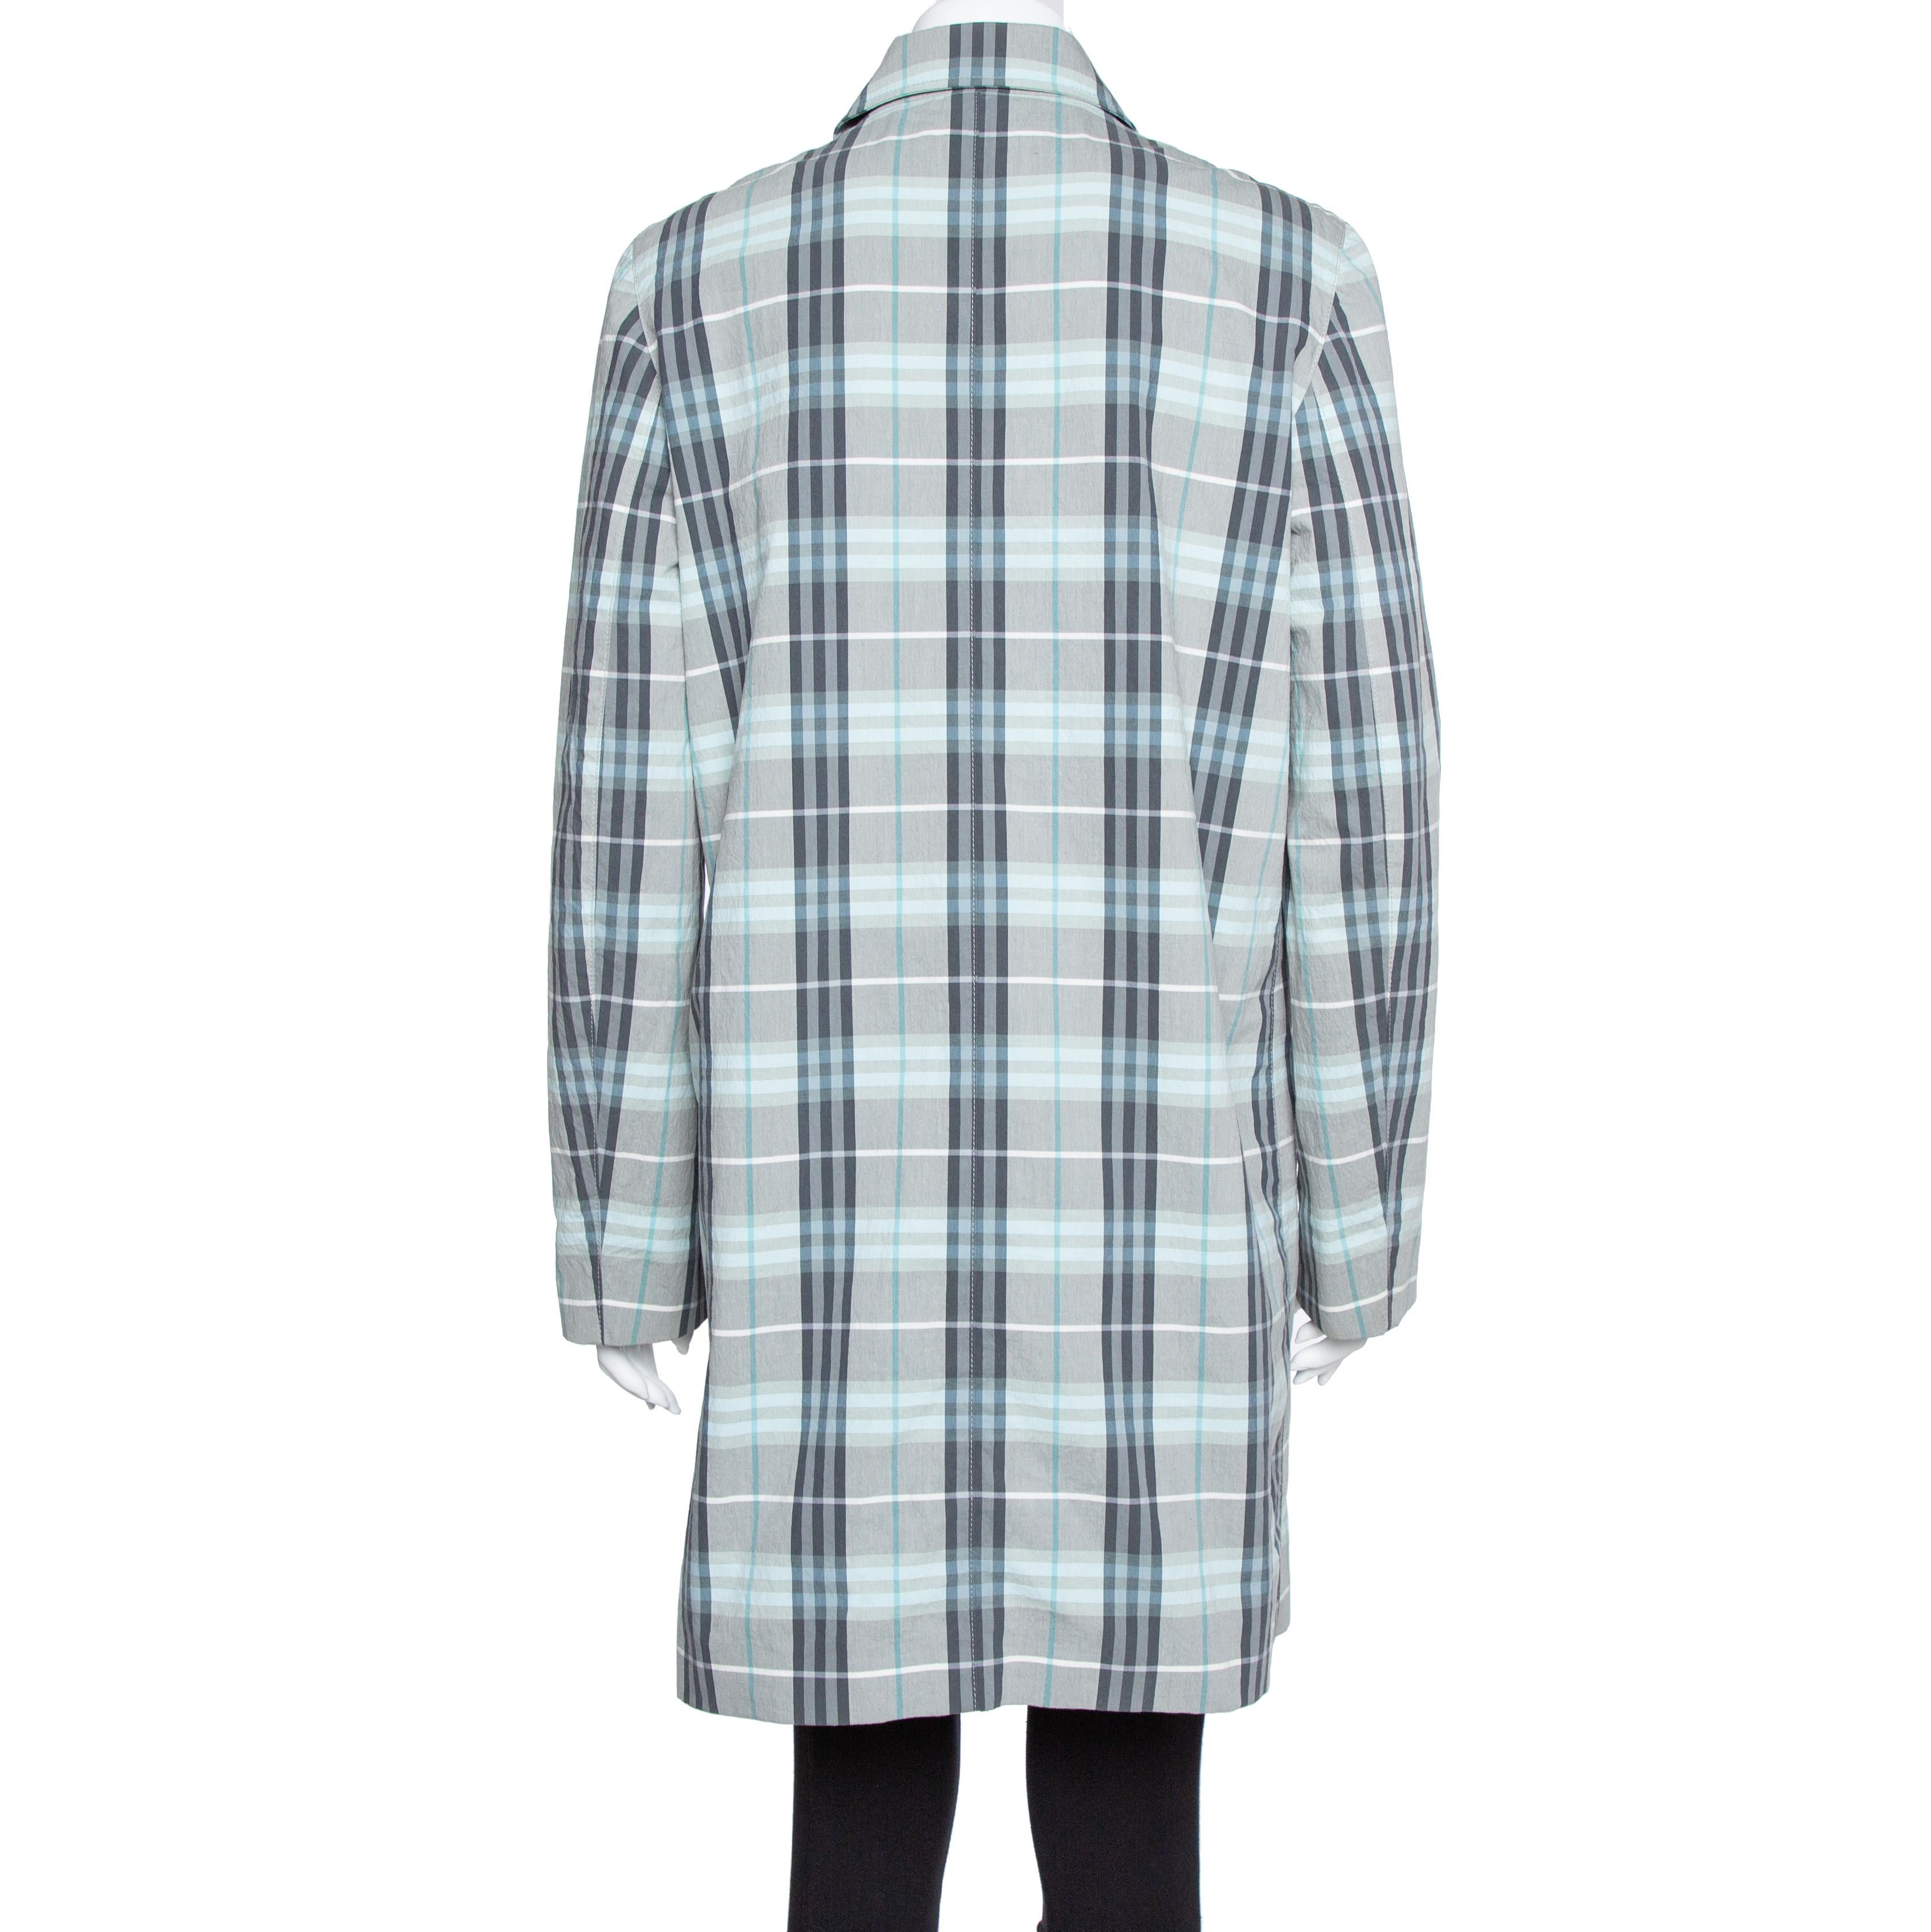 Burberry's coats are a dream addition to any woman's closet. This blue creation from Burberry London was crafted from quality materials and it not only carries a well-tailored silhouette but also stylish details like the Nova Check pattern all over,